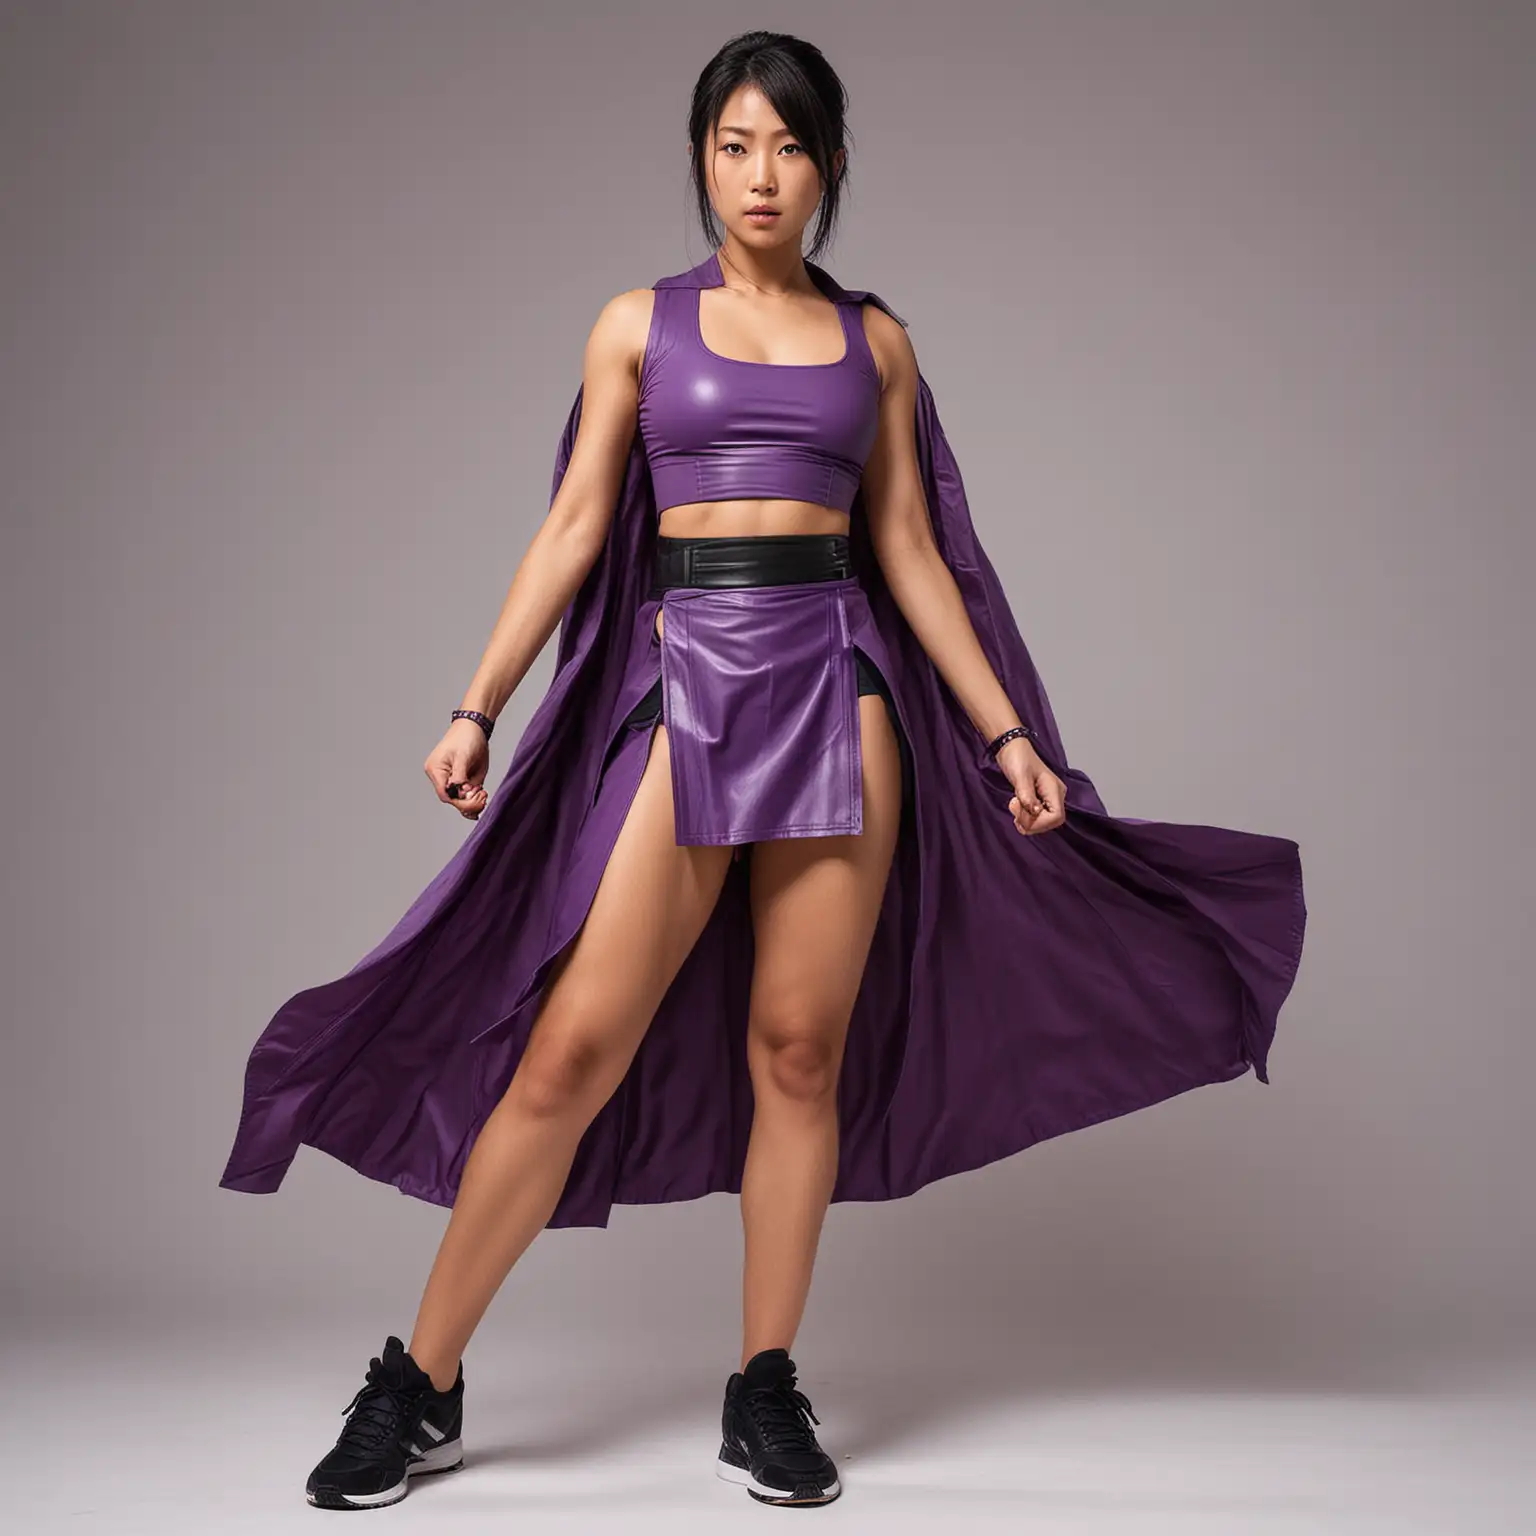 Muscular Japanese Woman in Purple Leather Dress and Karate Gi